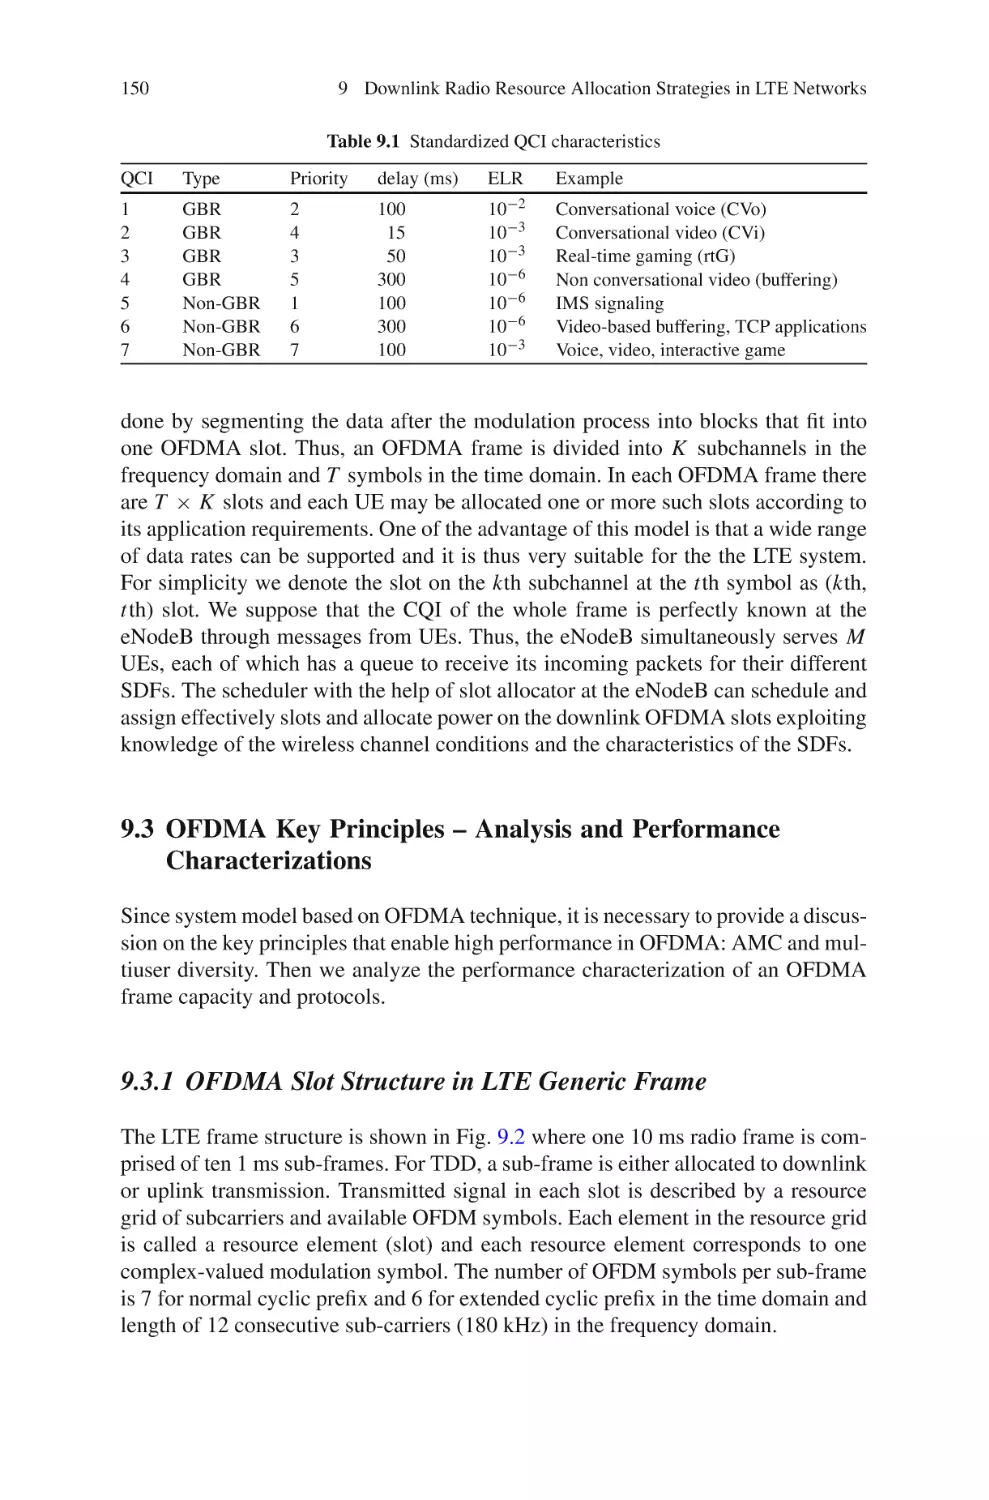 9.3  OFDMA Key Principles -- Analysis and Performance Characterizations
9.3.1  OFDMA Slot Structure in LTE Generic Frame